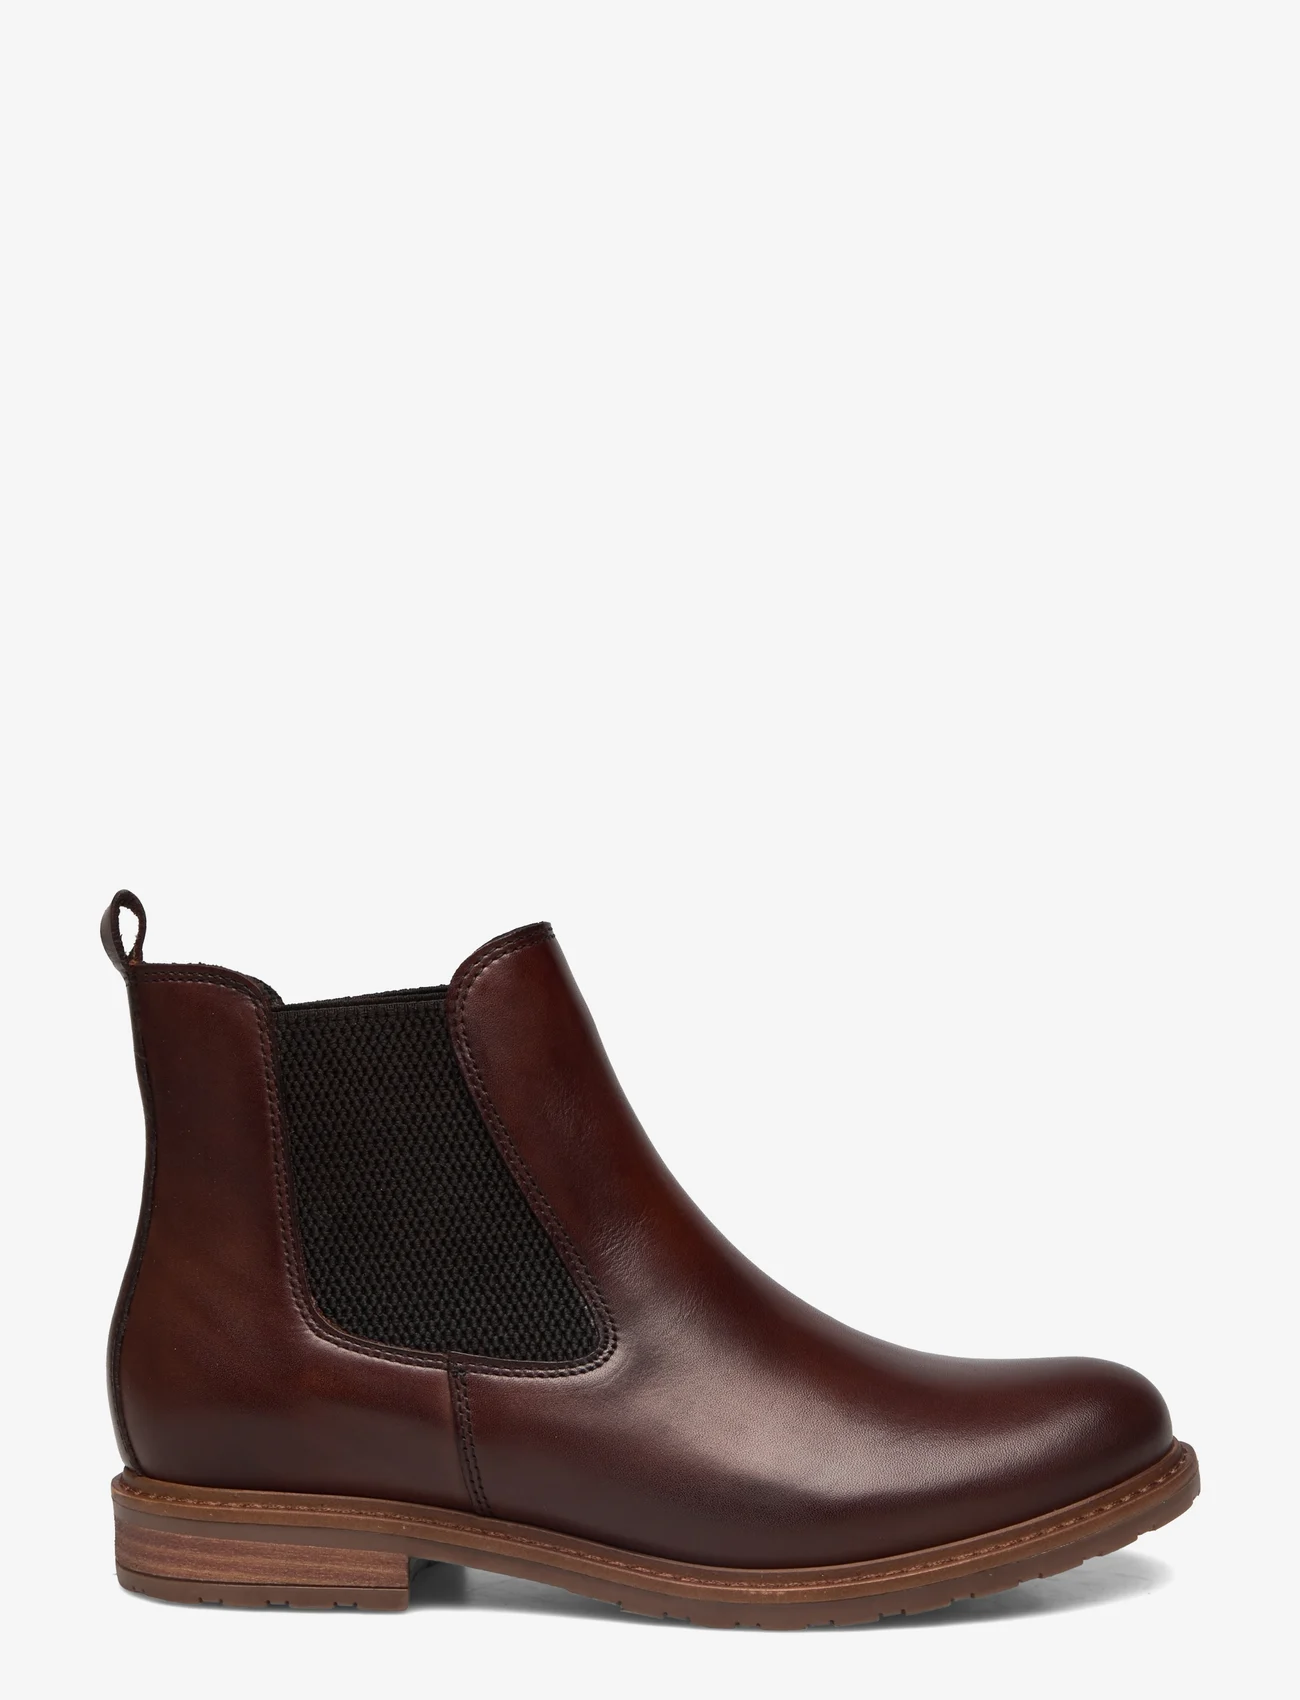 Tamaris - Women Boots - chelsea boots - muscat leather - 1